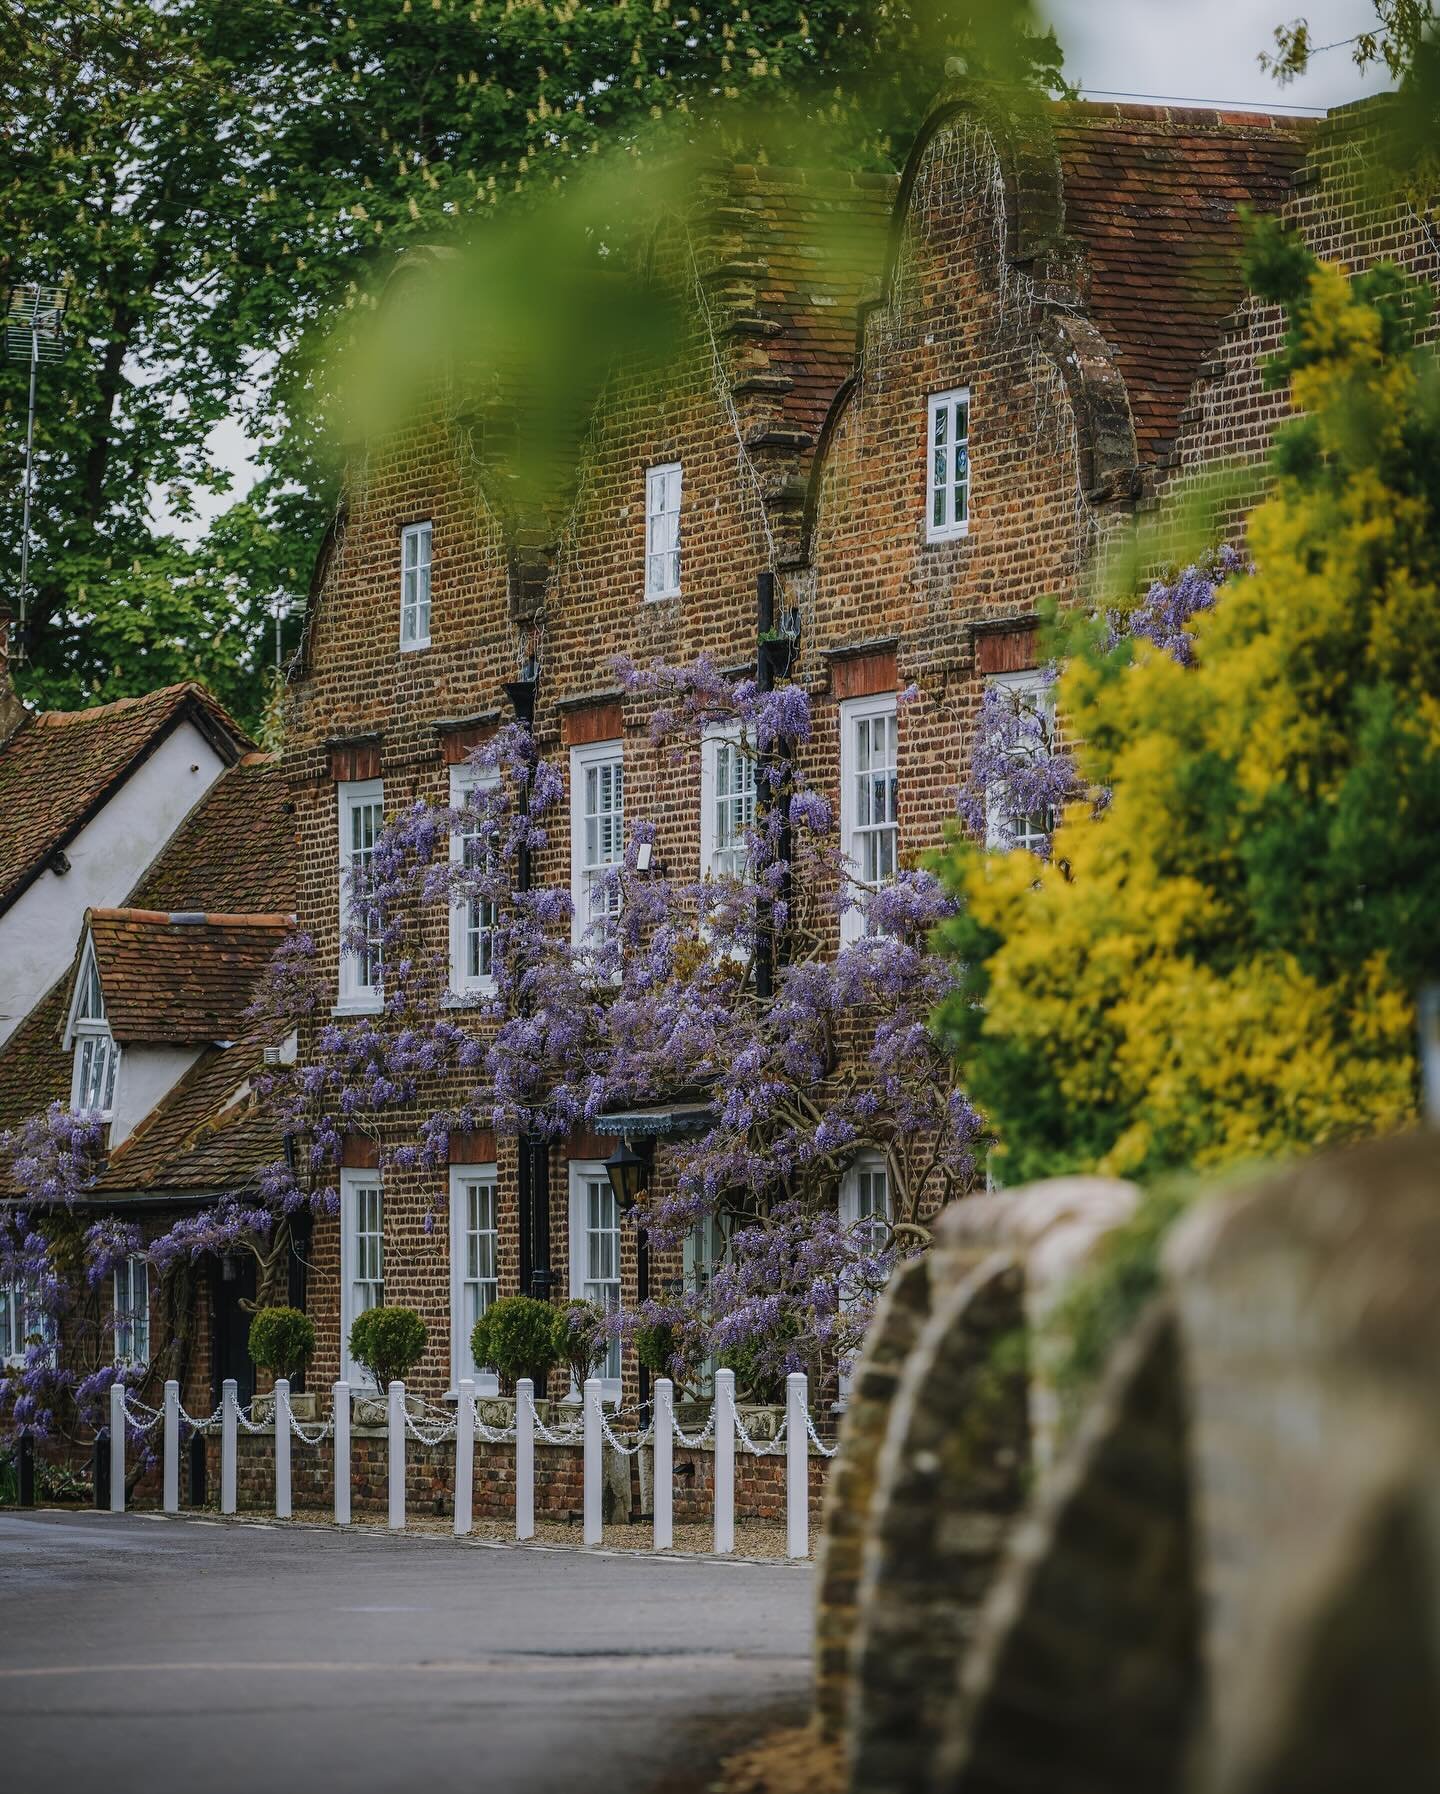 More shots from the small Buckinghamshire village of Denham. 💜🌳😍The name is derived from the Old English for &ldquo;homestead in a valley&rdquo;. It was listed in the Domesday Book of 1086 as Deneham. 
&bull;
&bull;
#village #villagelife #villagep